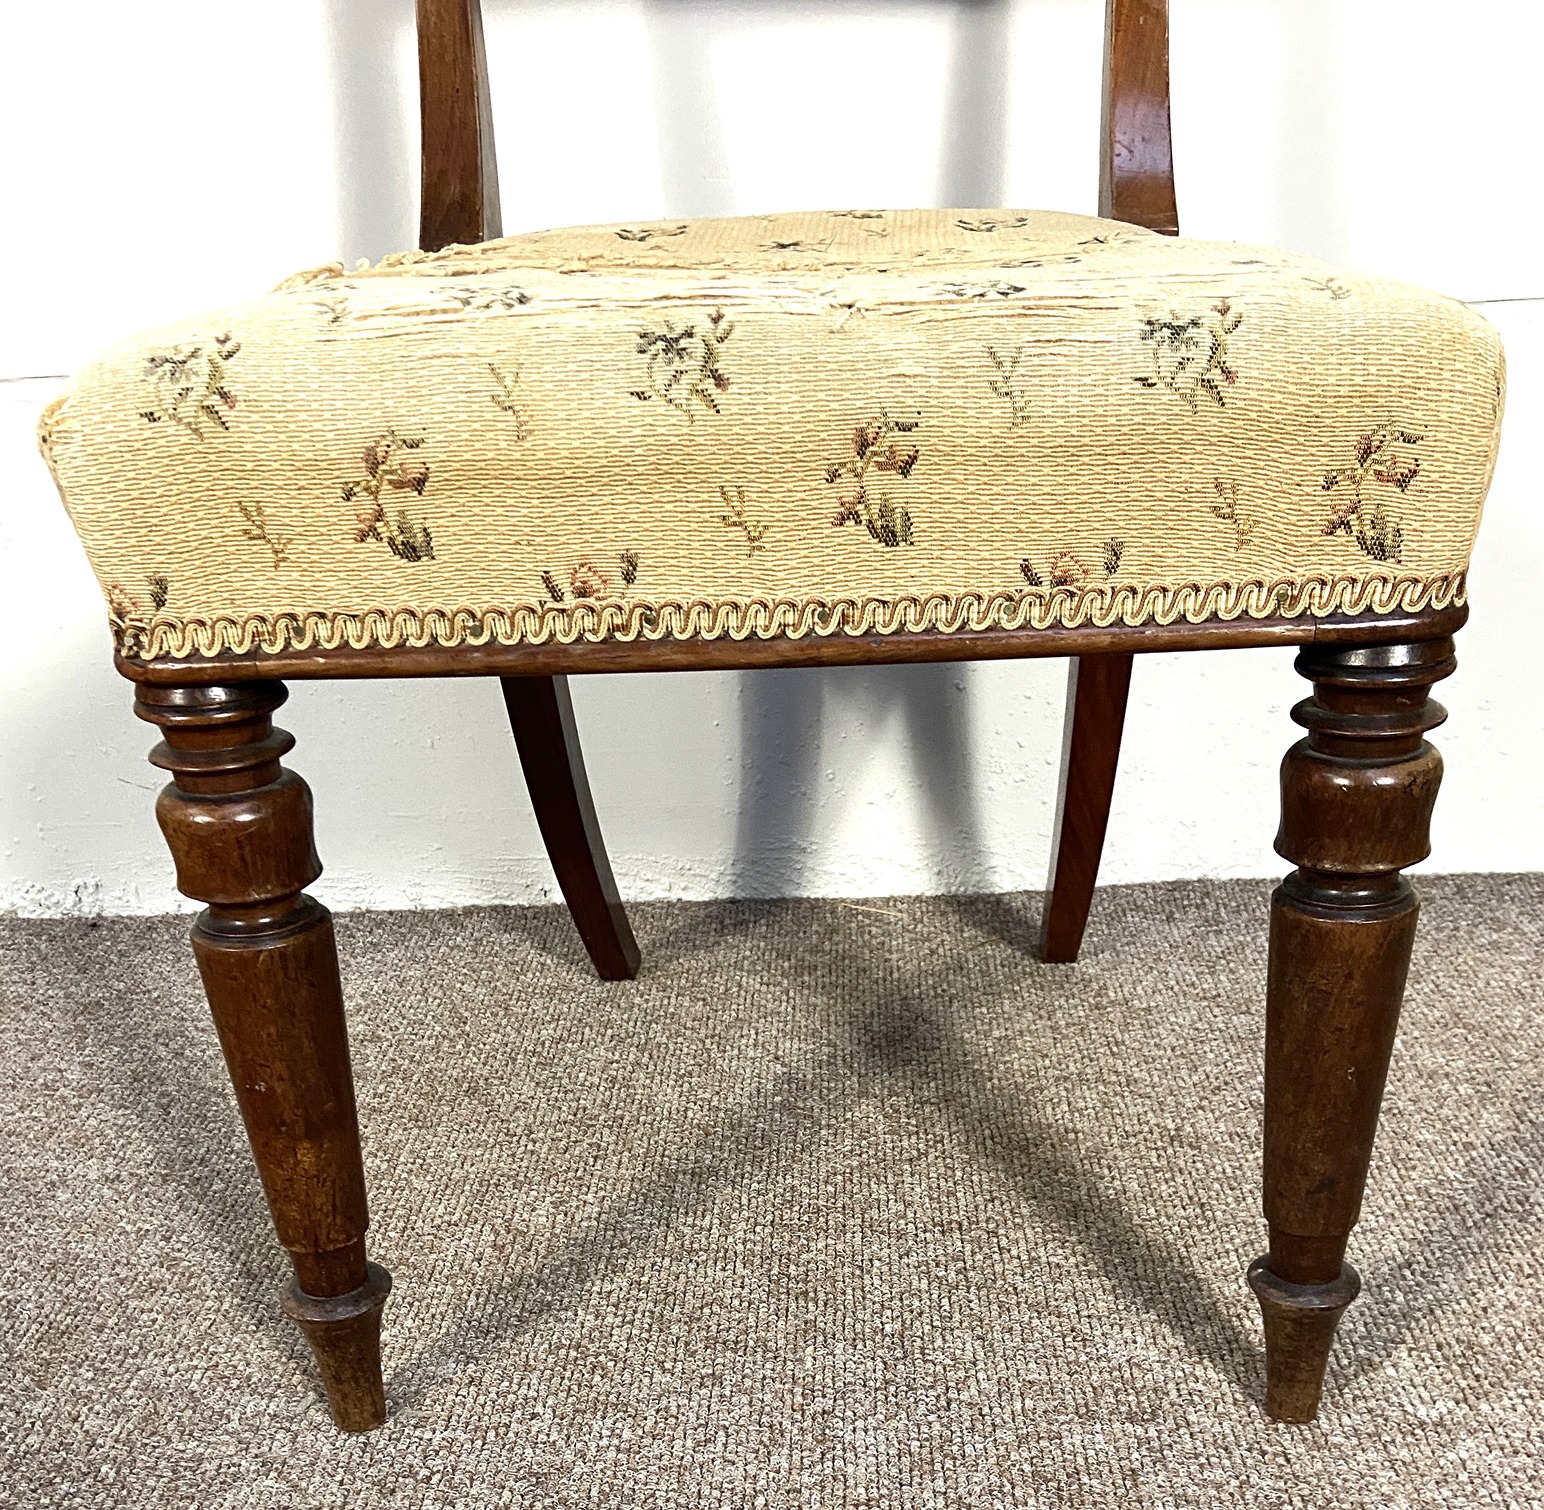 A pair of 19th century mahogany framed dining chairs, and a small salon chair with carved back (3) - Image 4 of 12